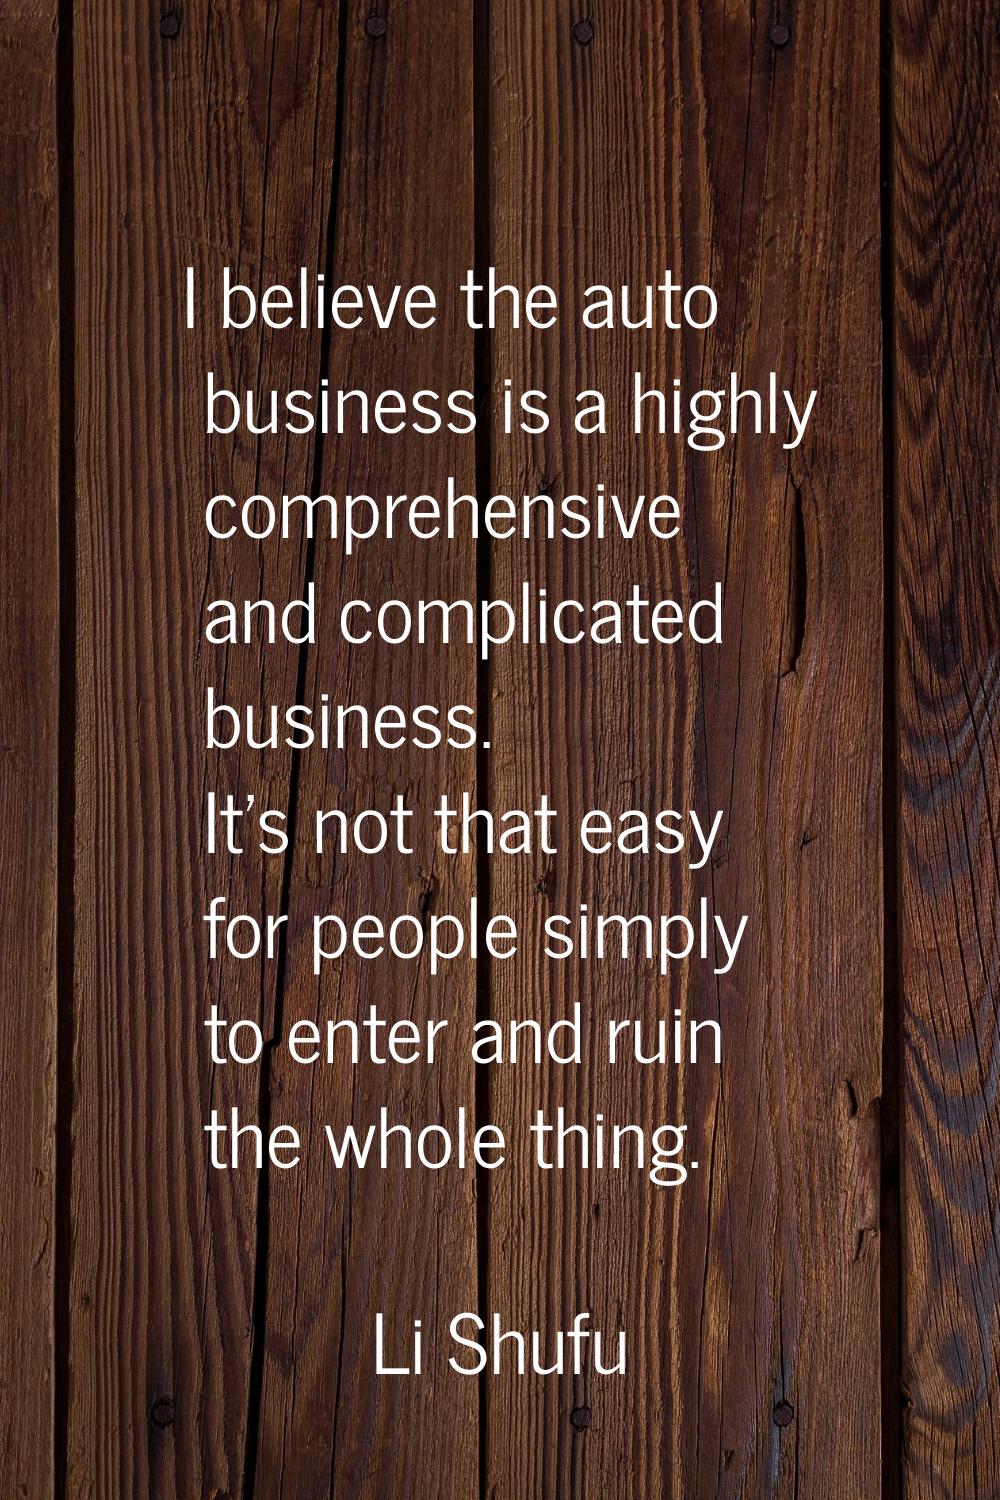 I believe the auto business is a highly comprehensive and complicated business. It's not that easy 